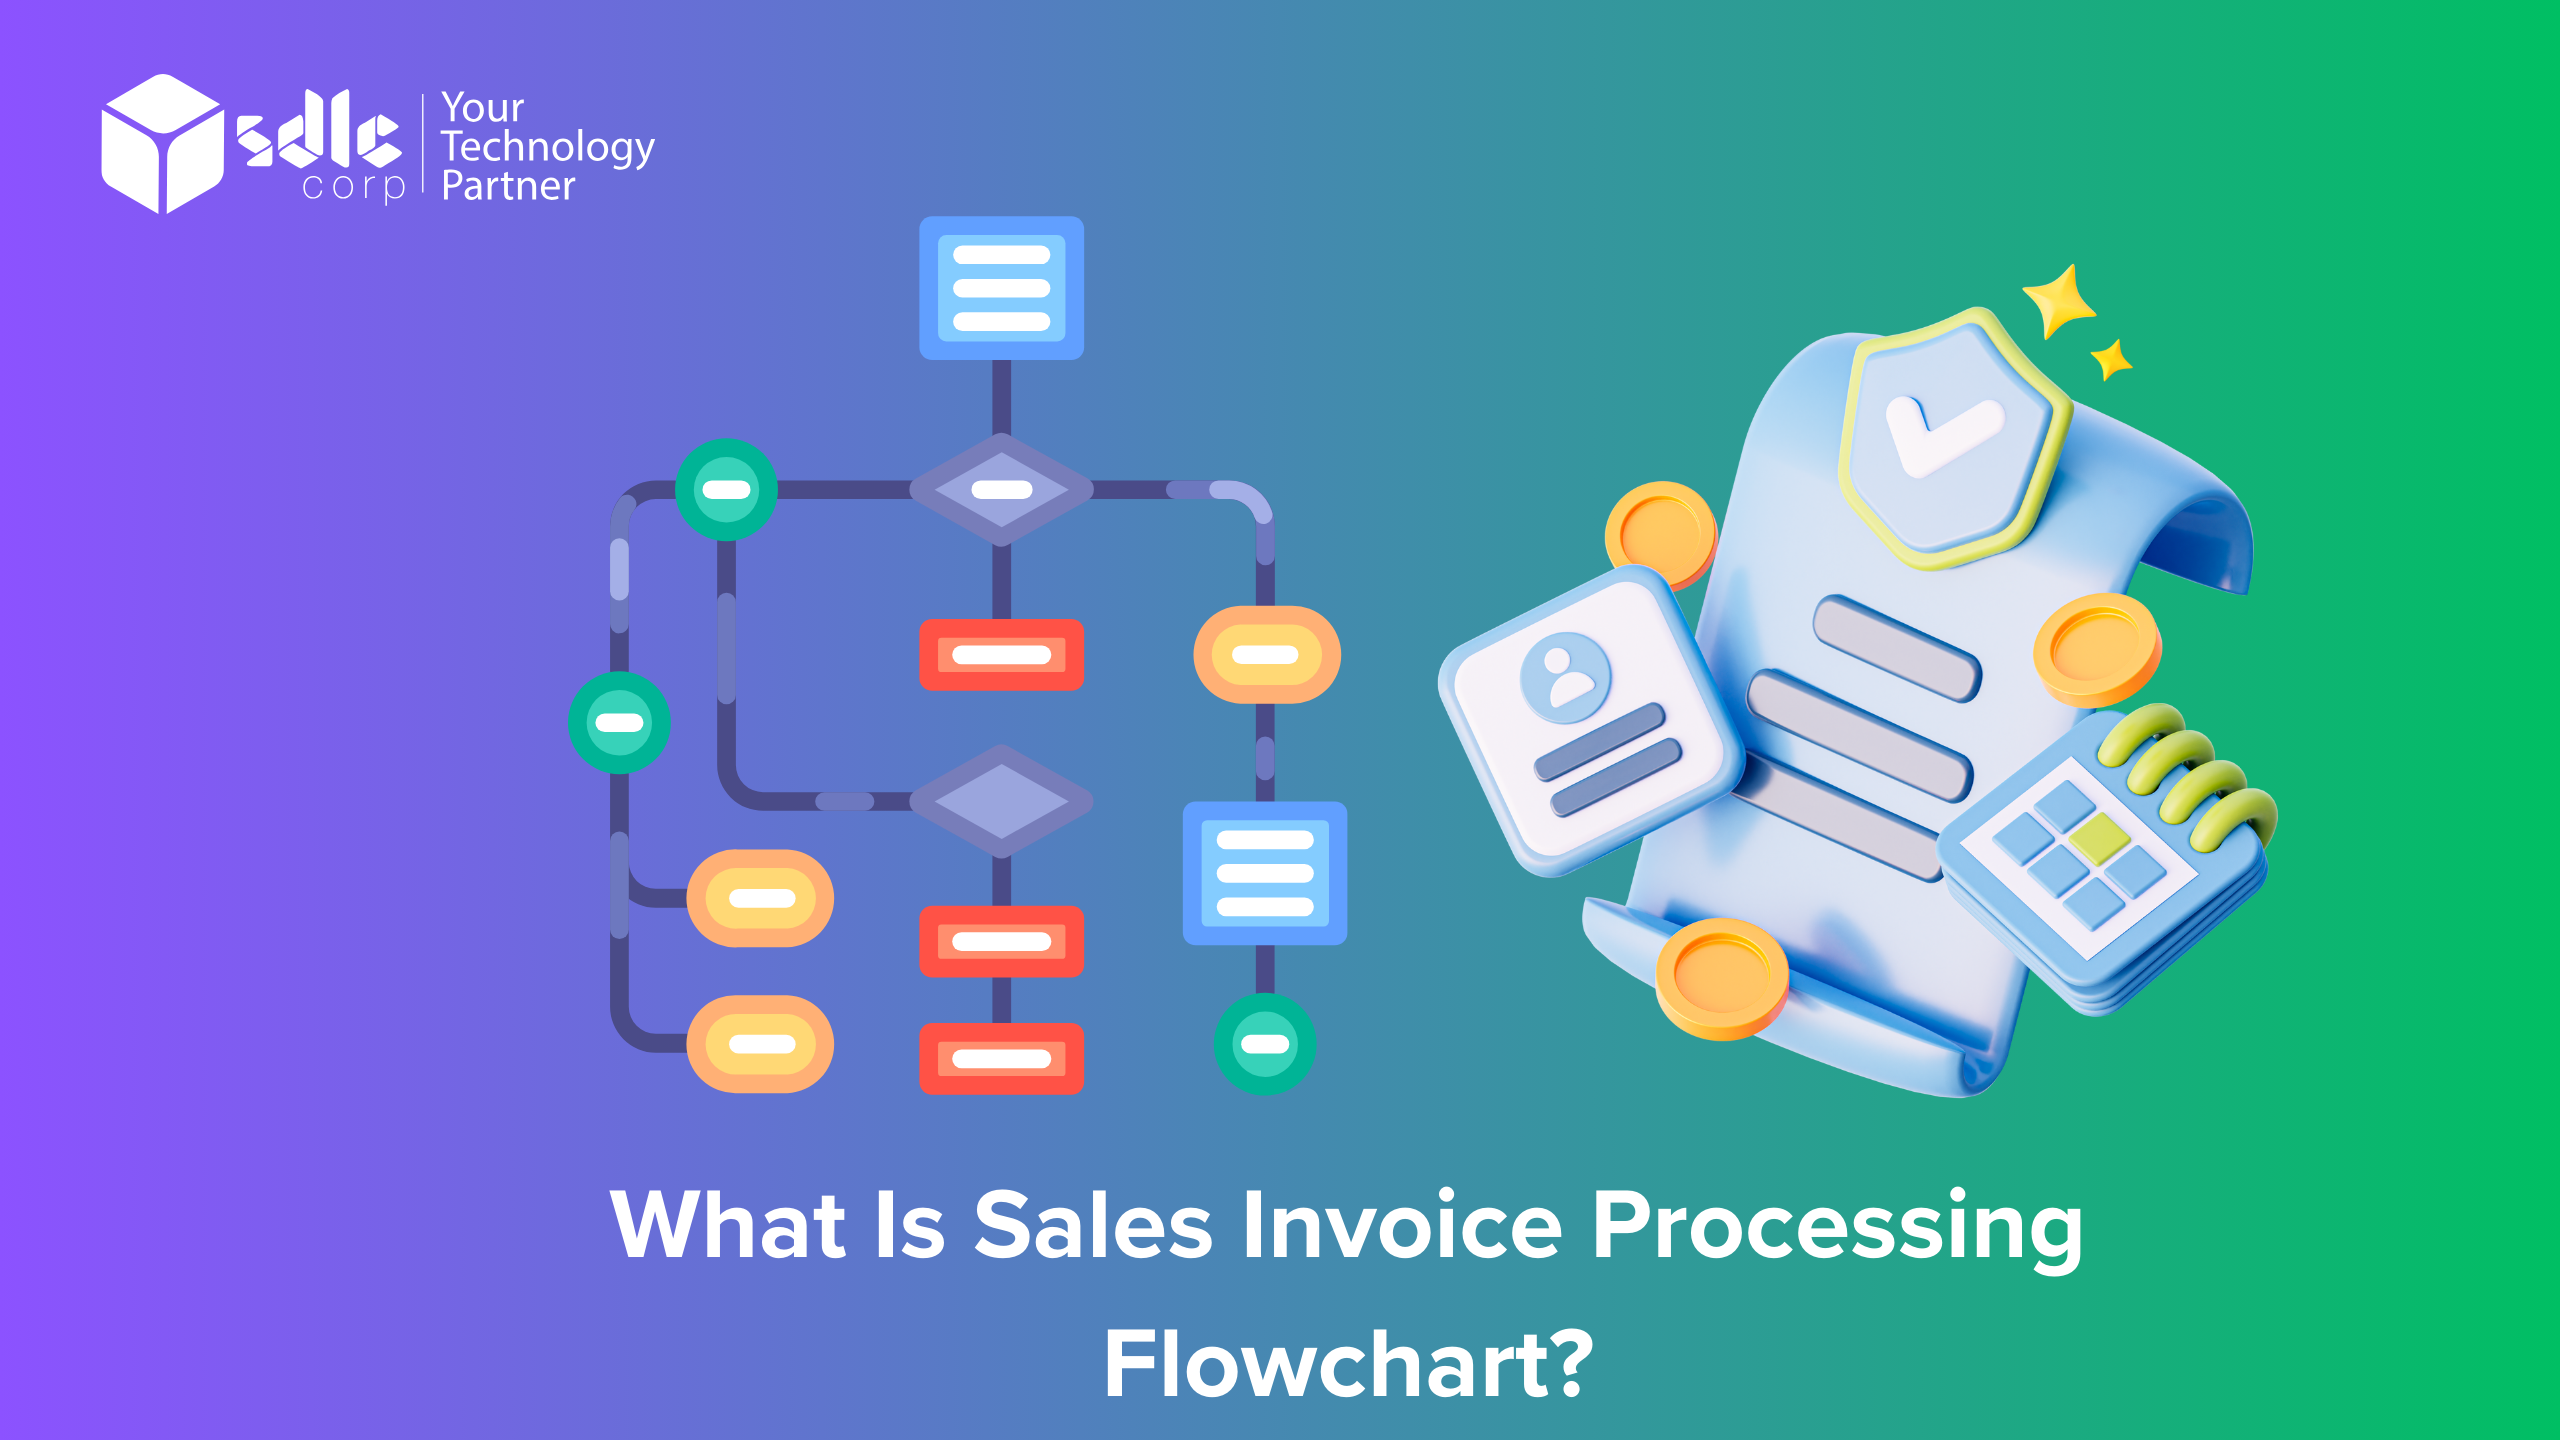 What is sales Invoice Processing Flowchart